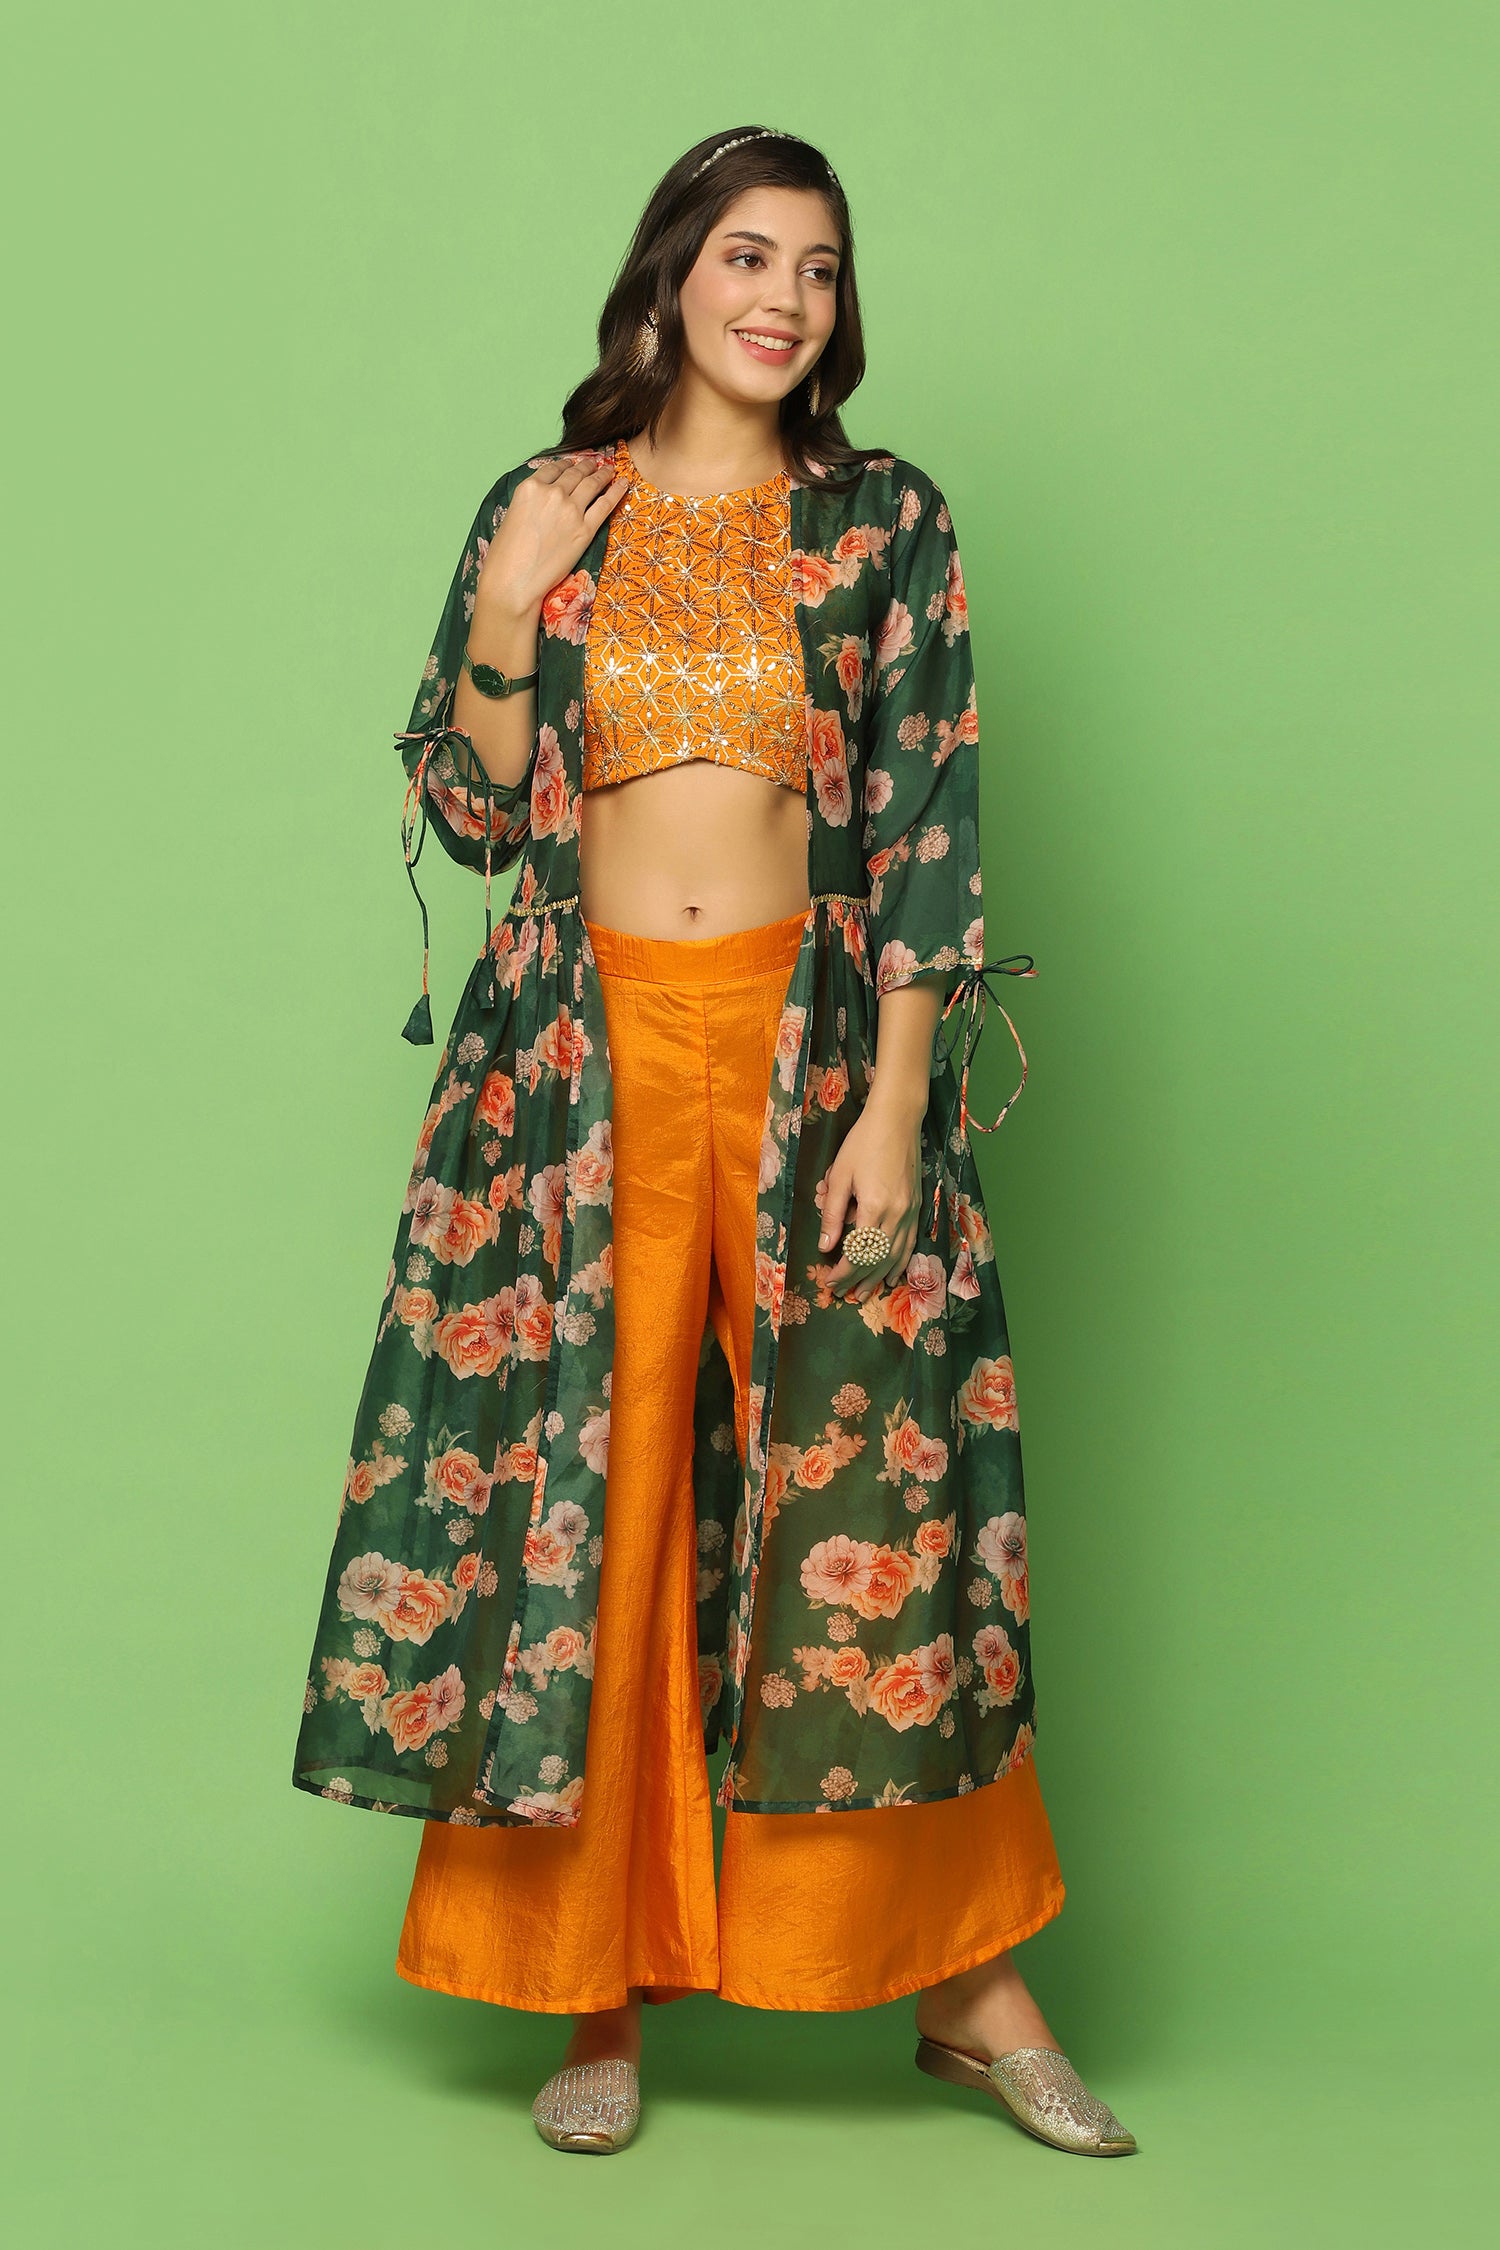 Best Indo Western Outfit Ideas for the upcoming Navratri Season